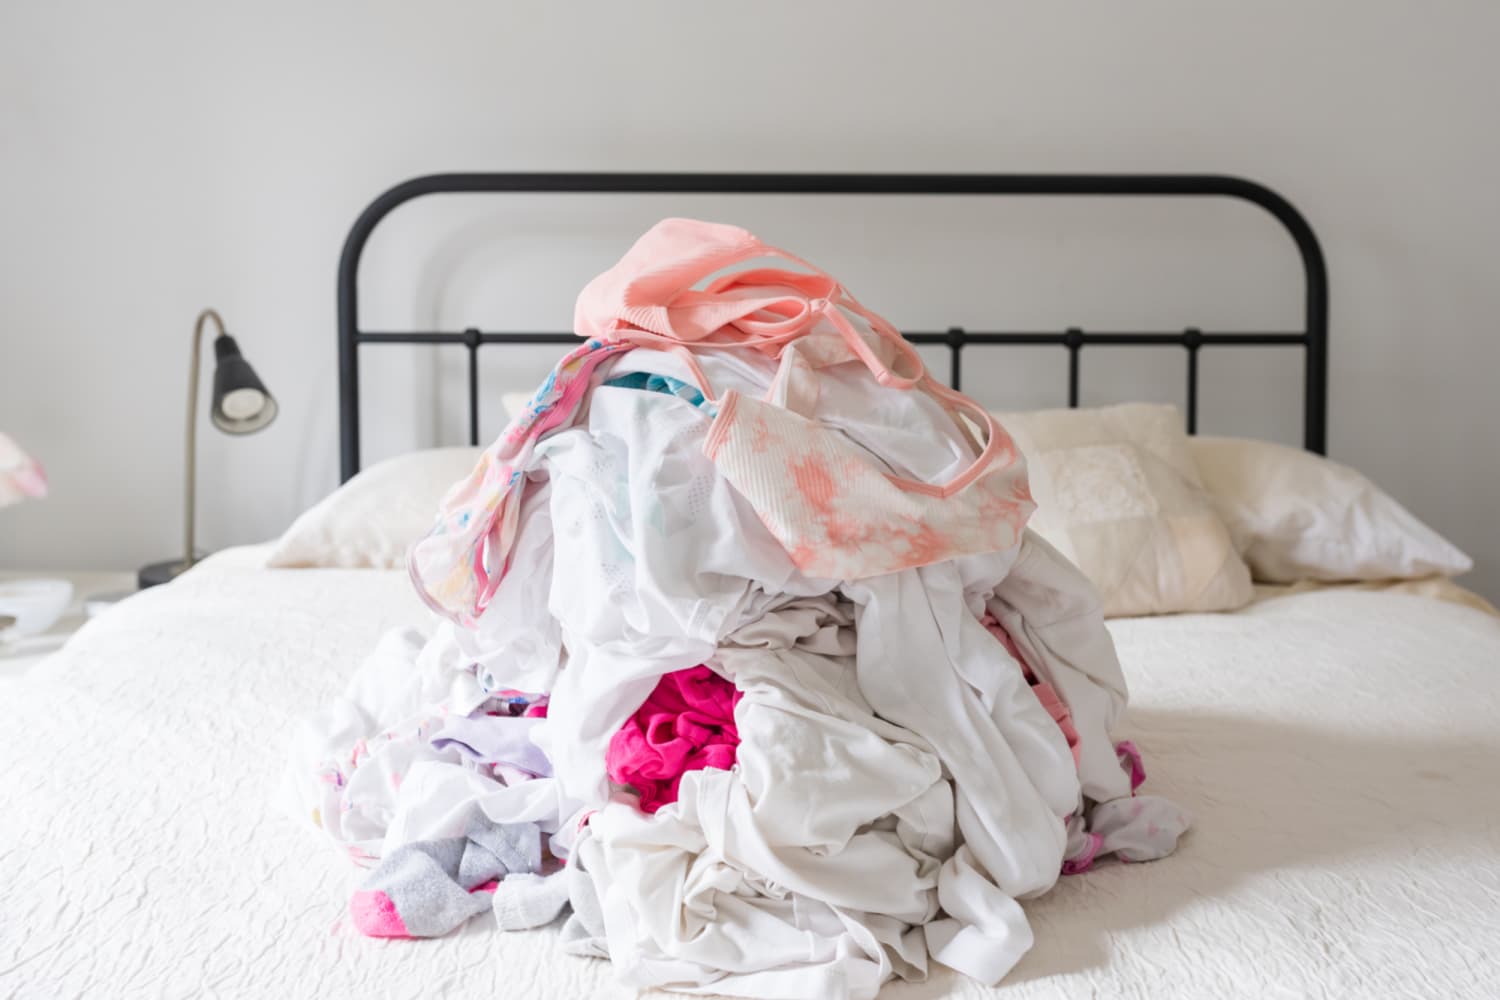 How to Sanitize Clothes, Bed Sheets and Towels